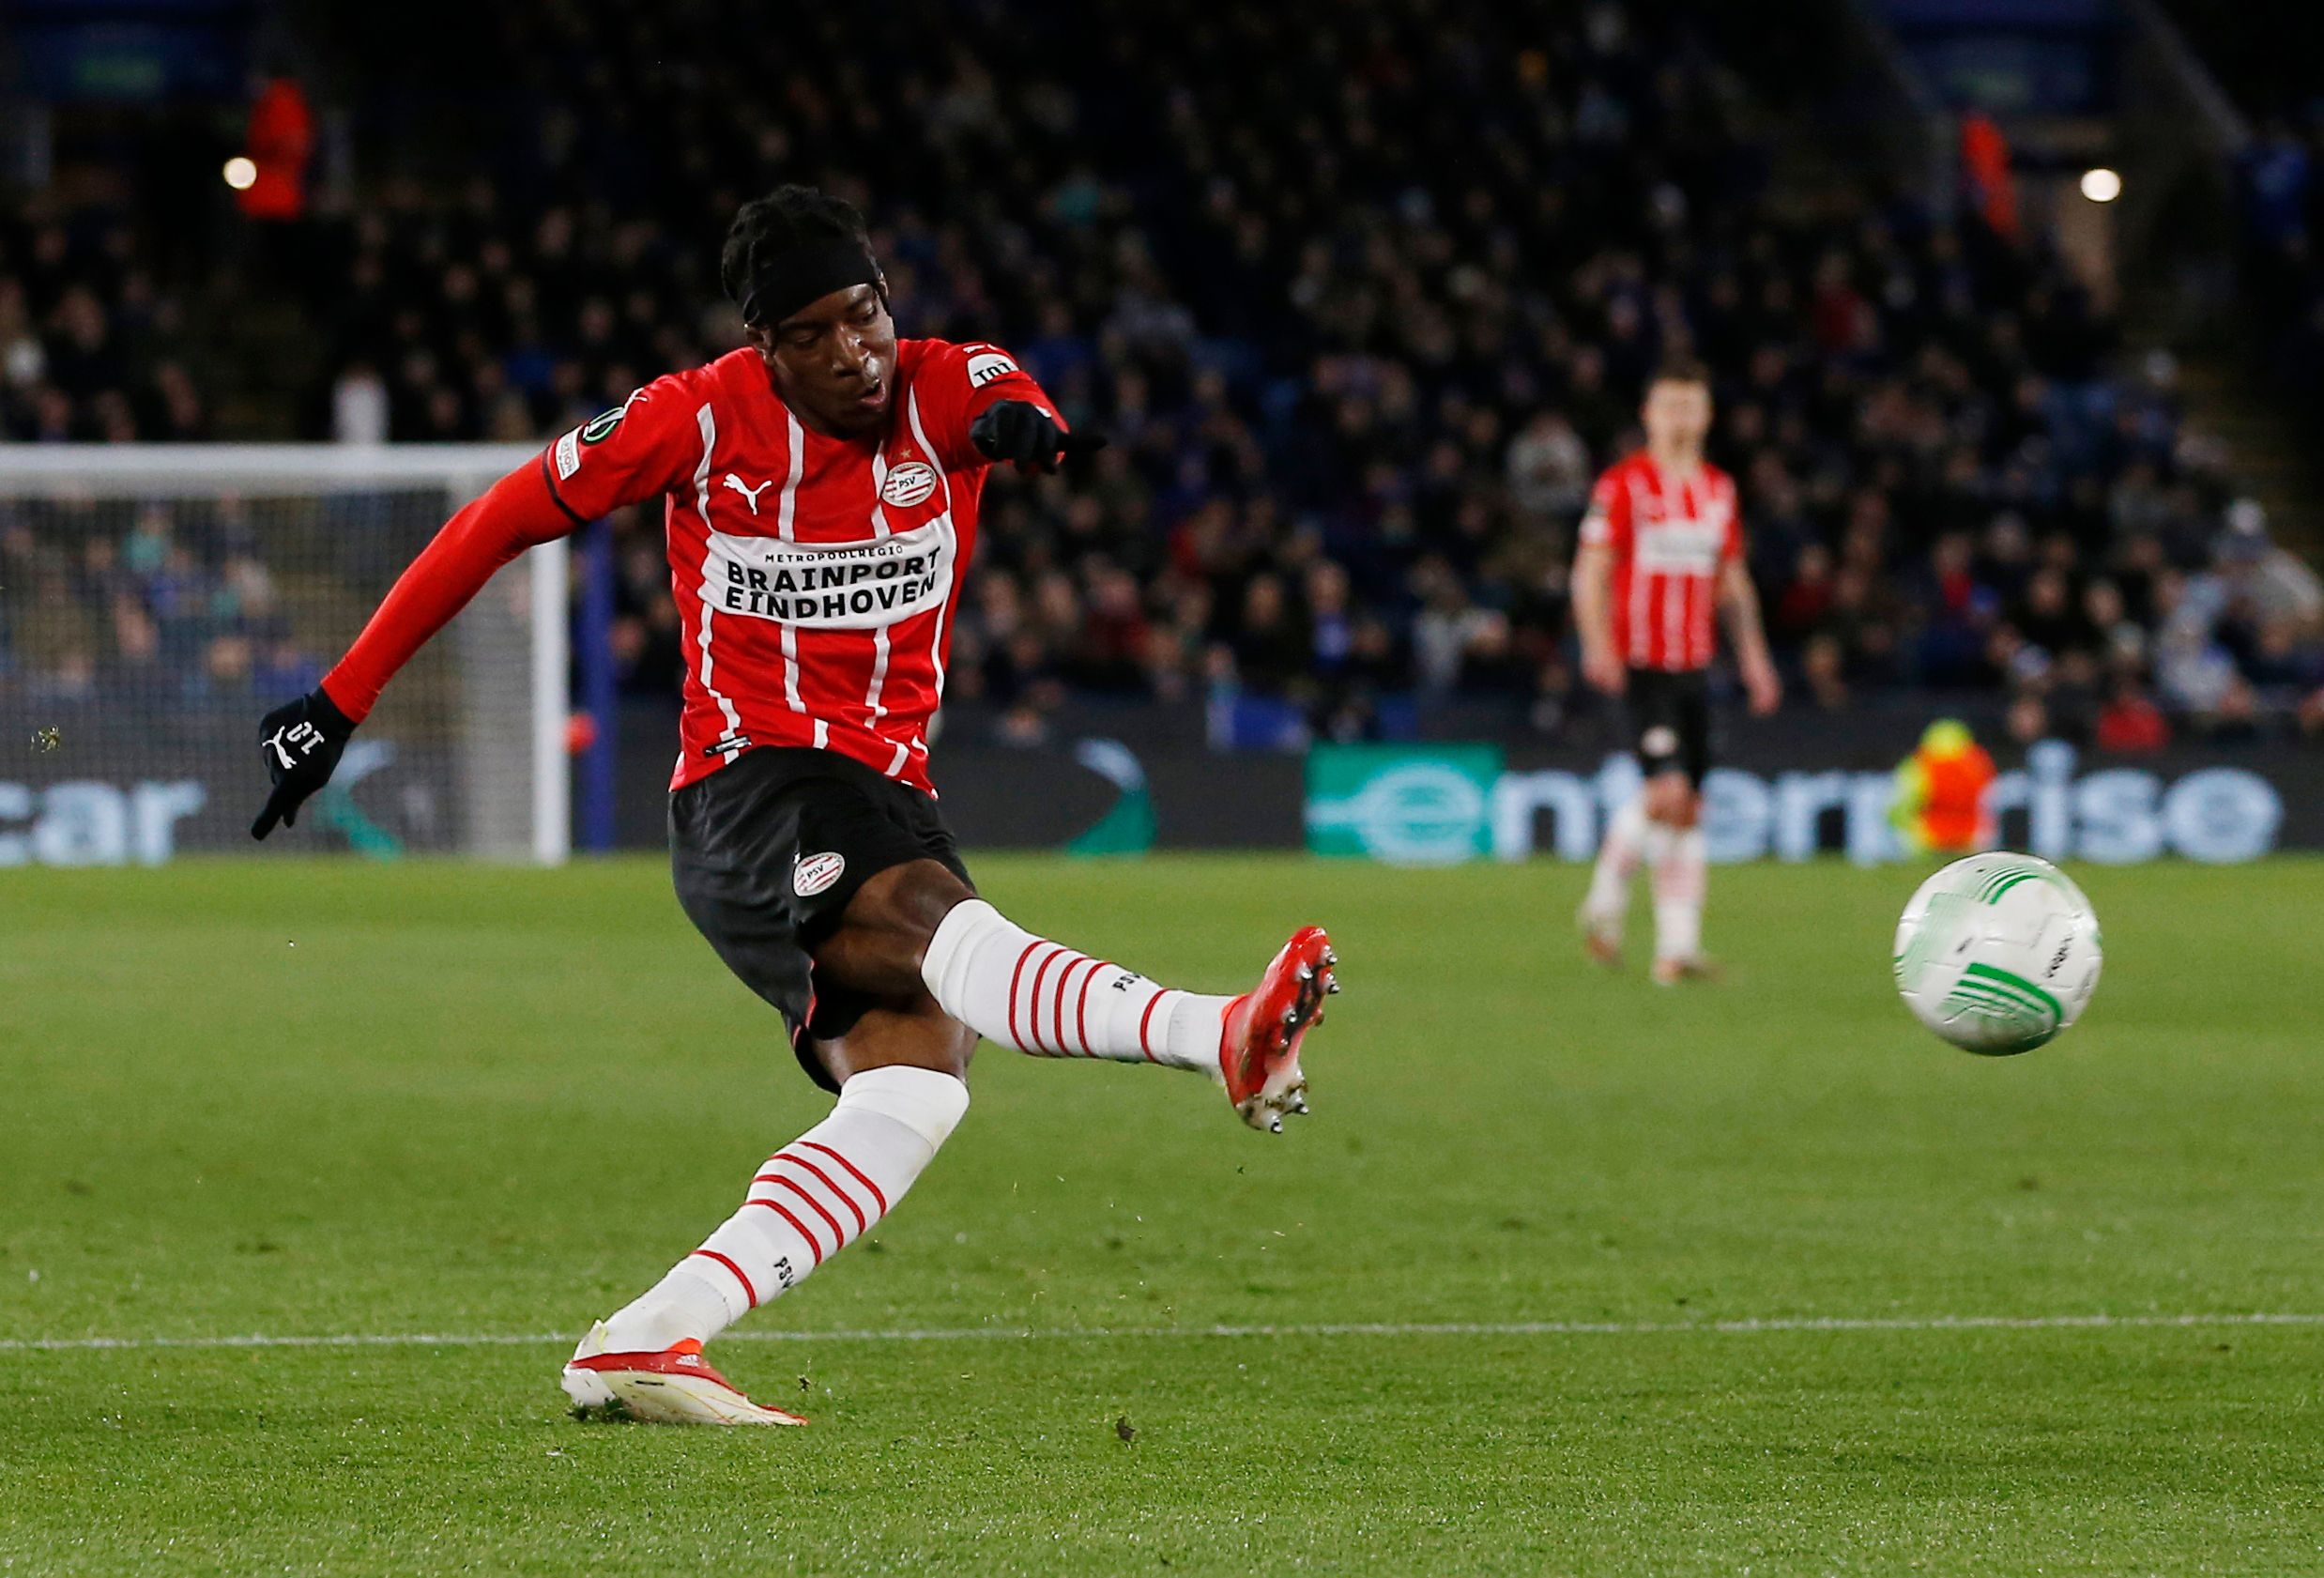 Soccer Football - Europa League - Quarter Final - First Leg - Leicester City v PSV Eindhoven - King Power Stadium, Leicester, Britain - April 7, 2022  PSV Eindhoven's Noni Madueke shoots at goal REUTERS/Craig Brough